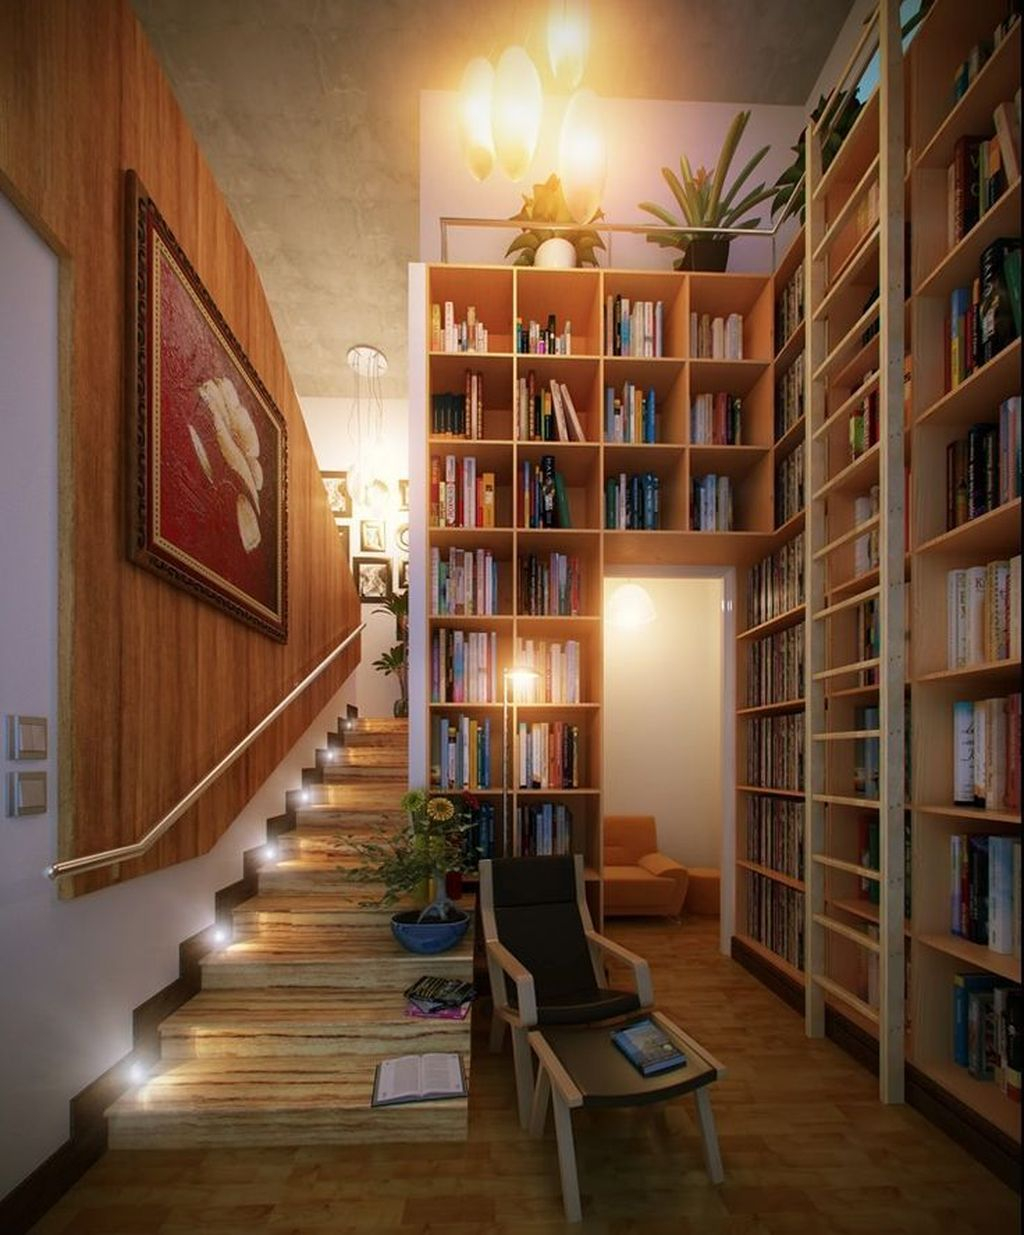 Smart Library Design Ideas For Home To Add To Your List 35